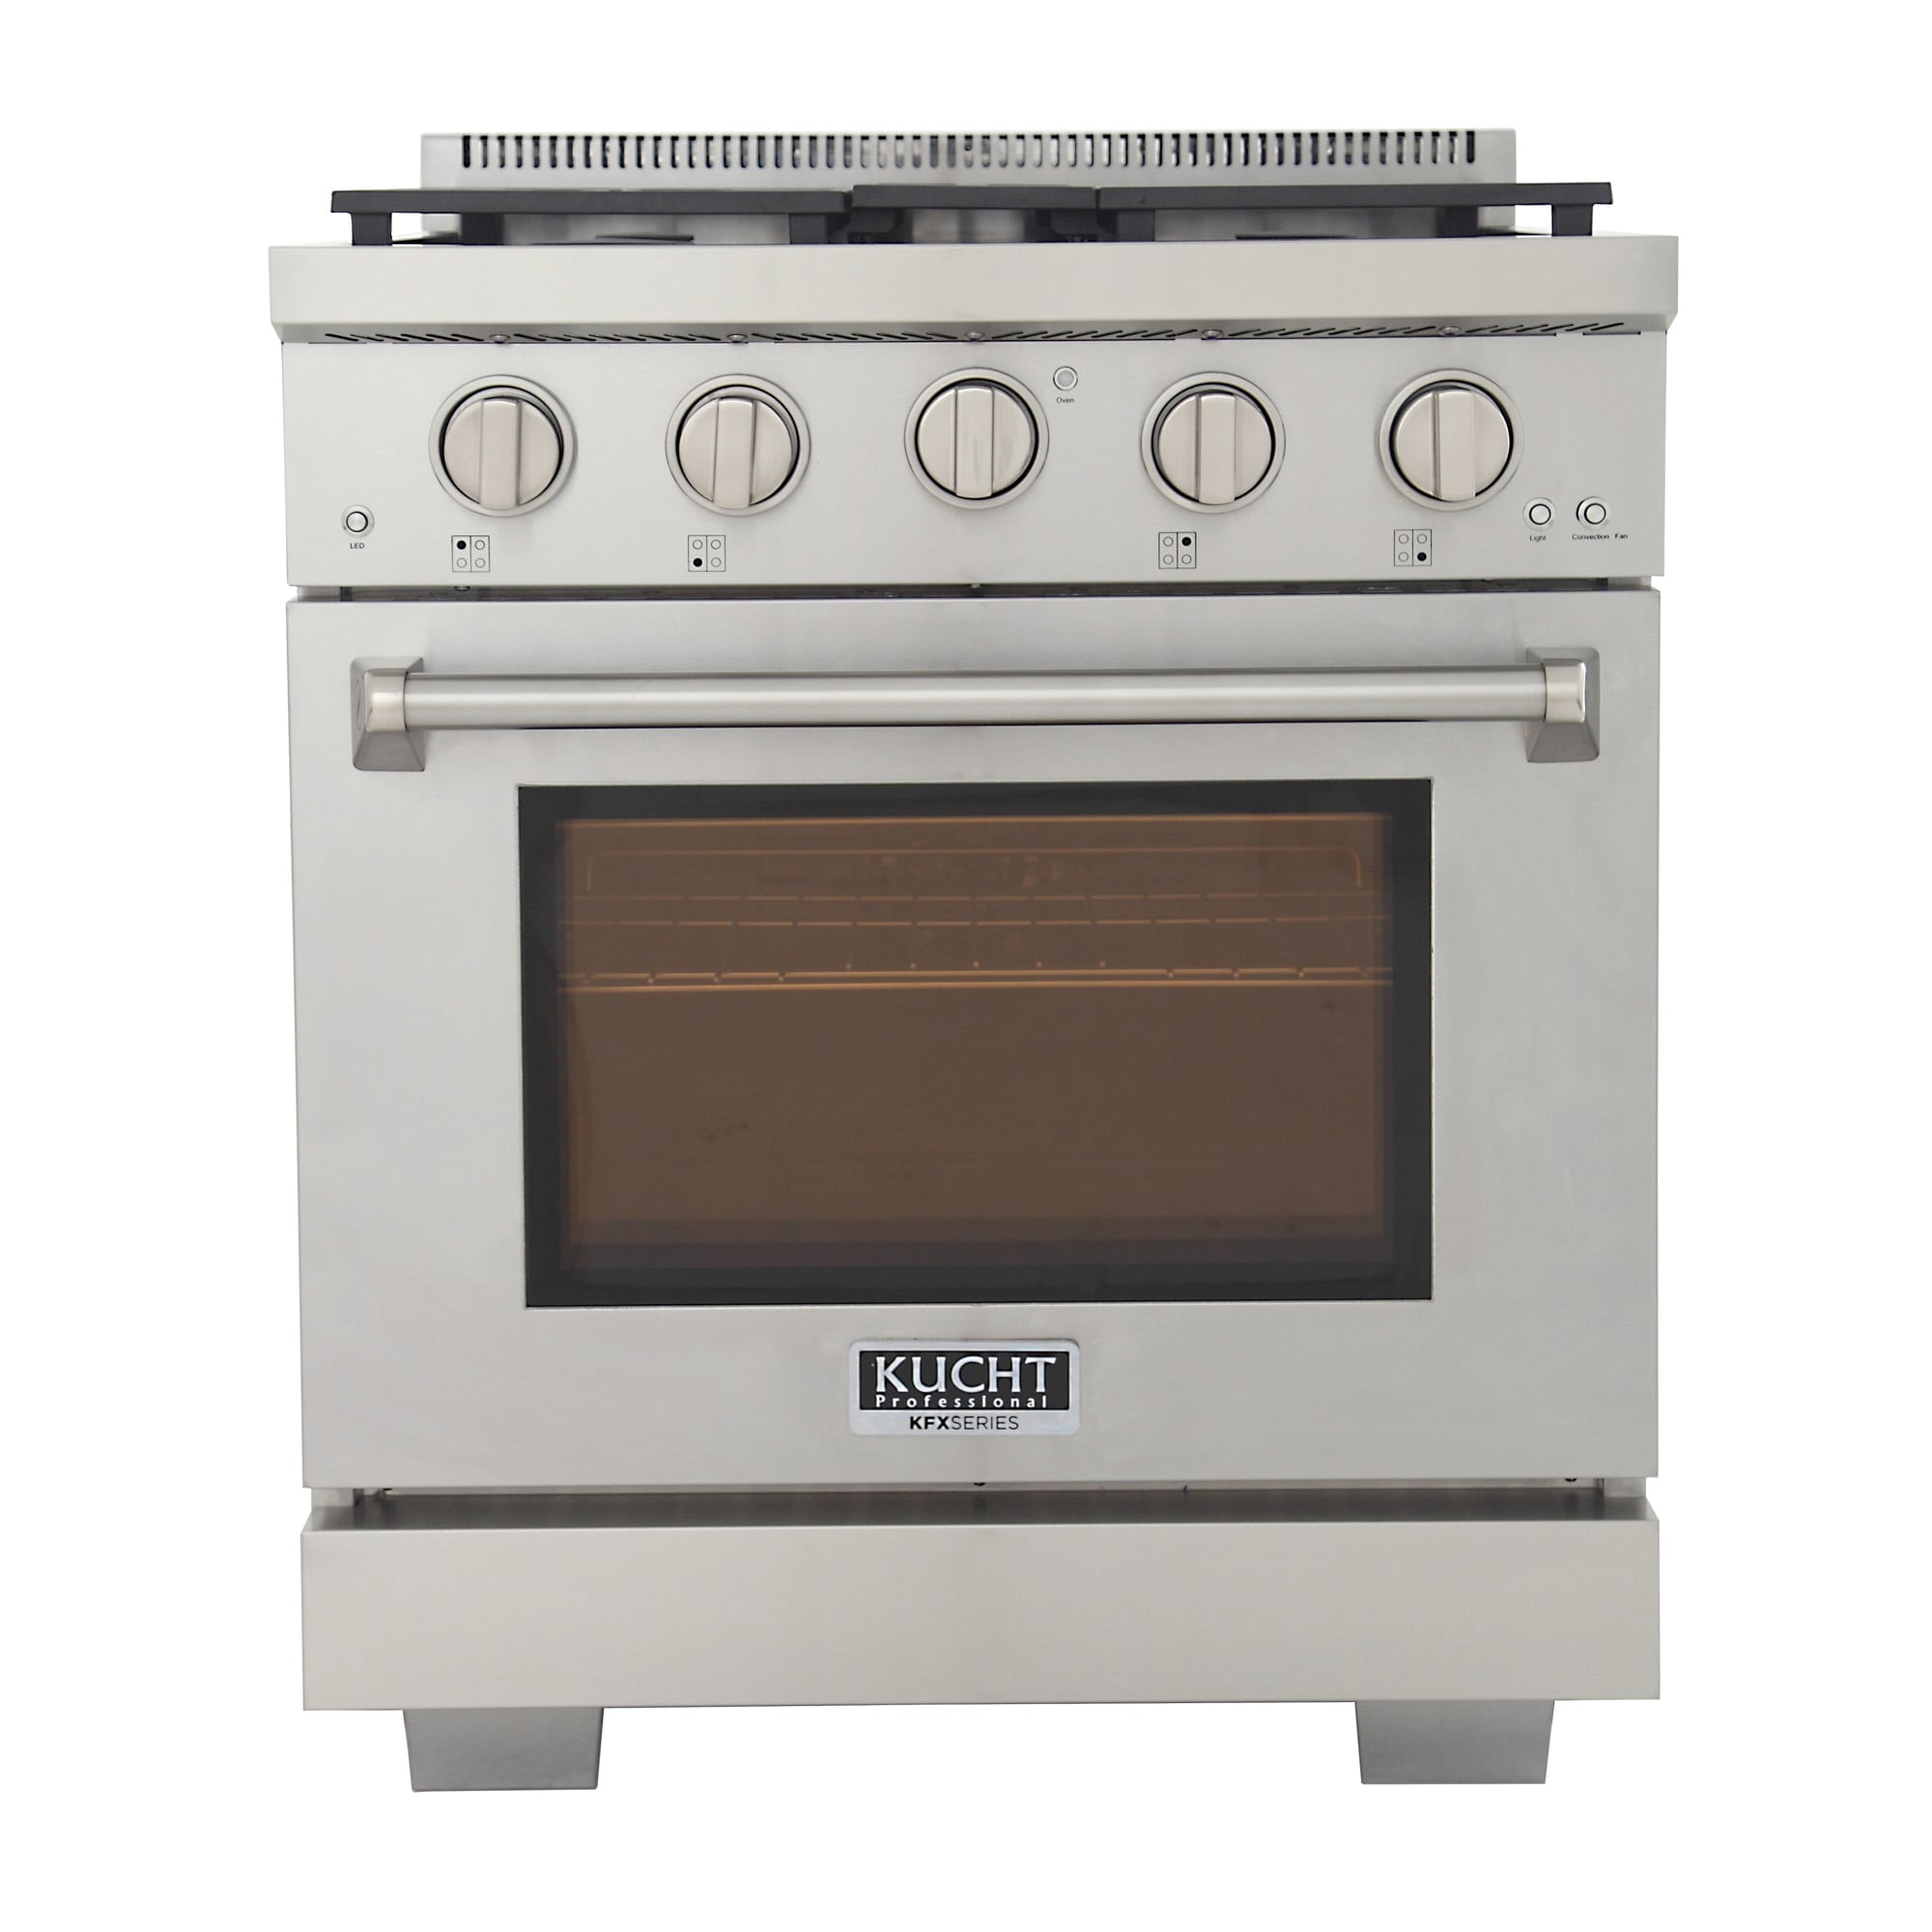 Professional Commercial Ovens: Convection, Gas, Electric